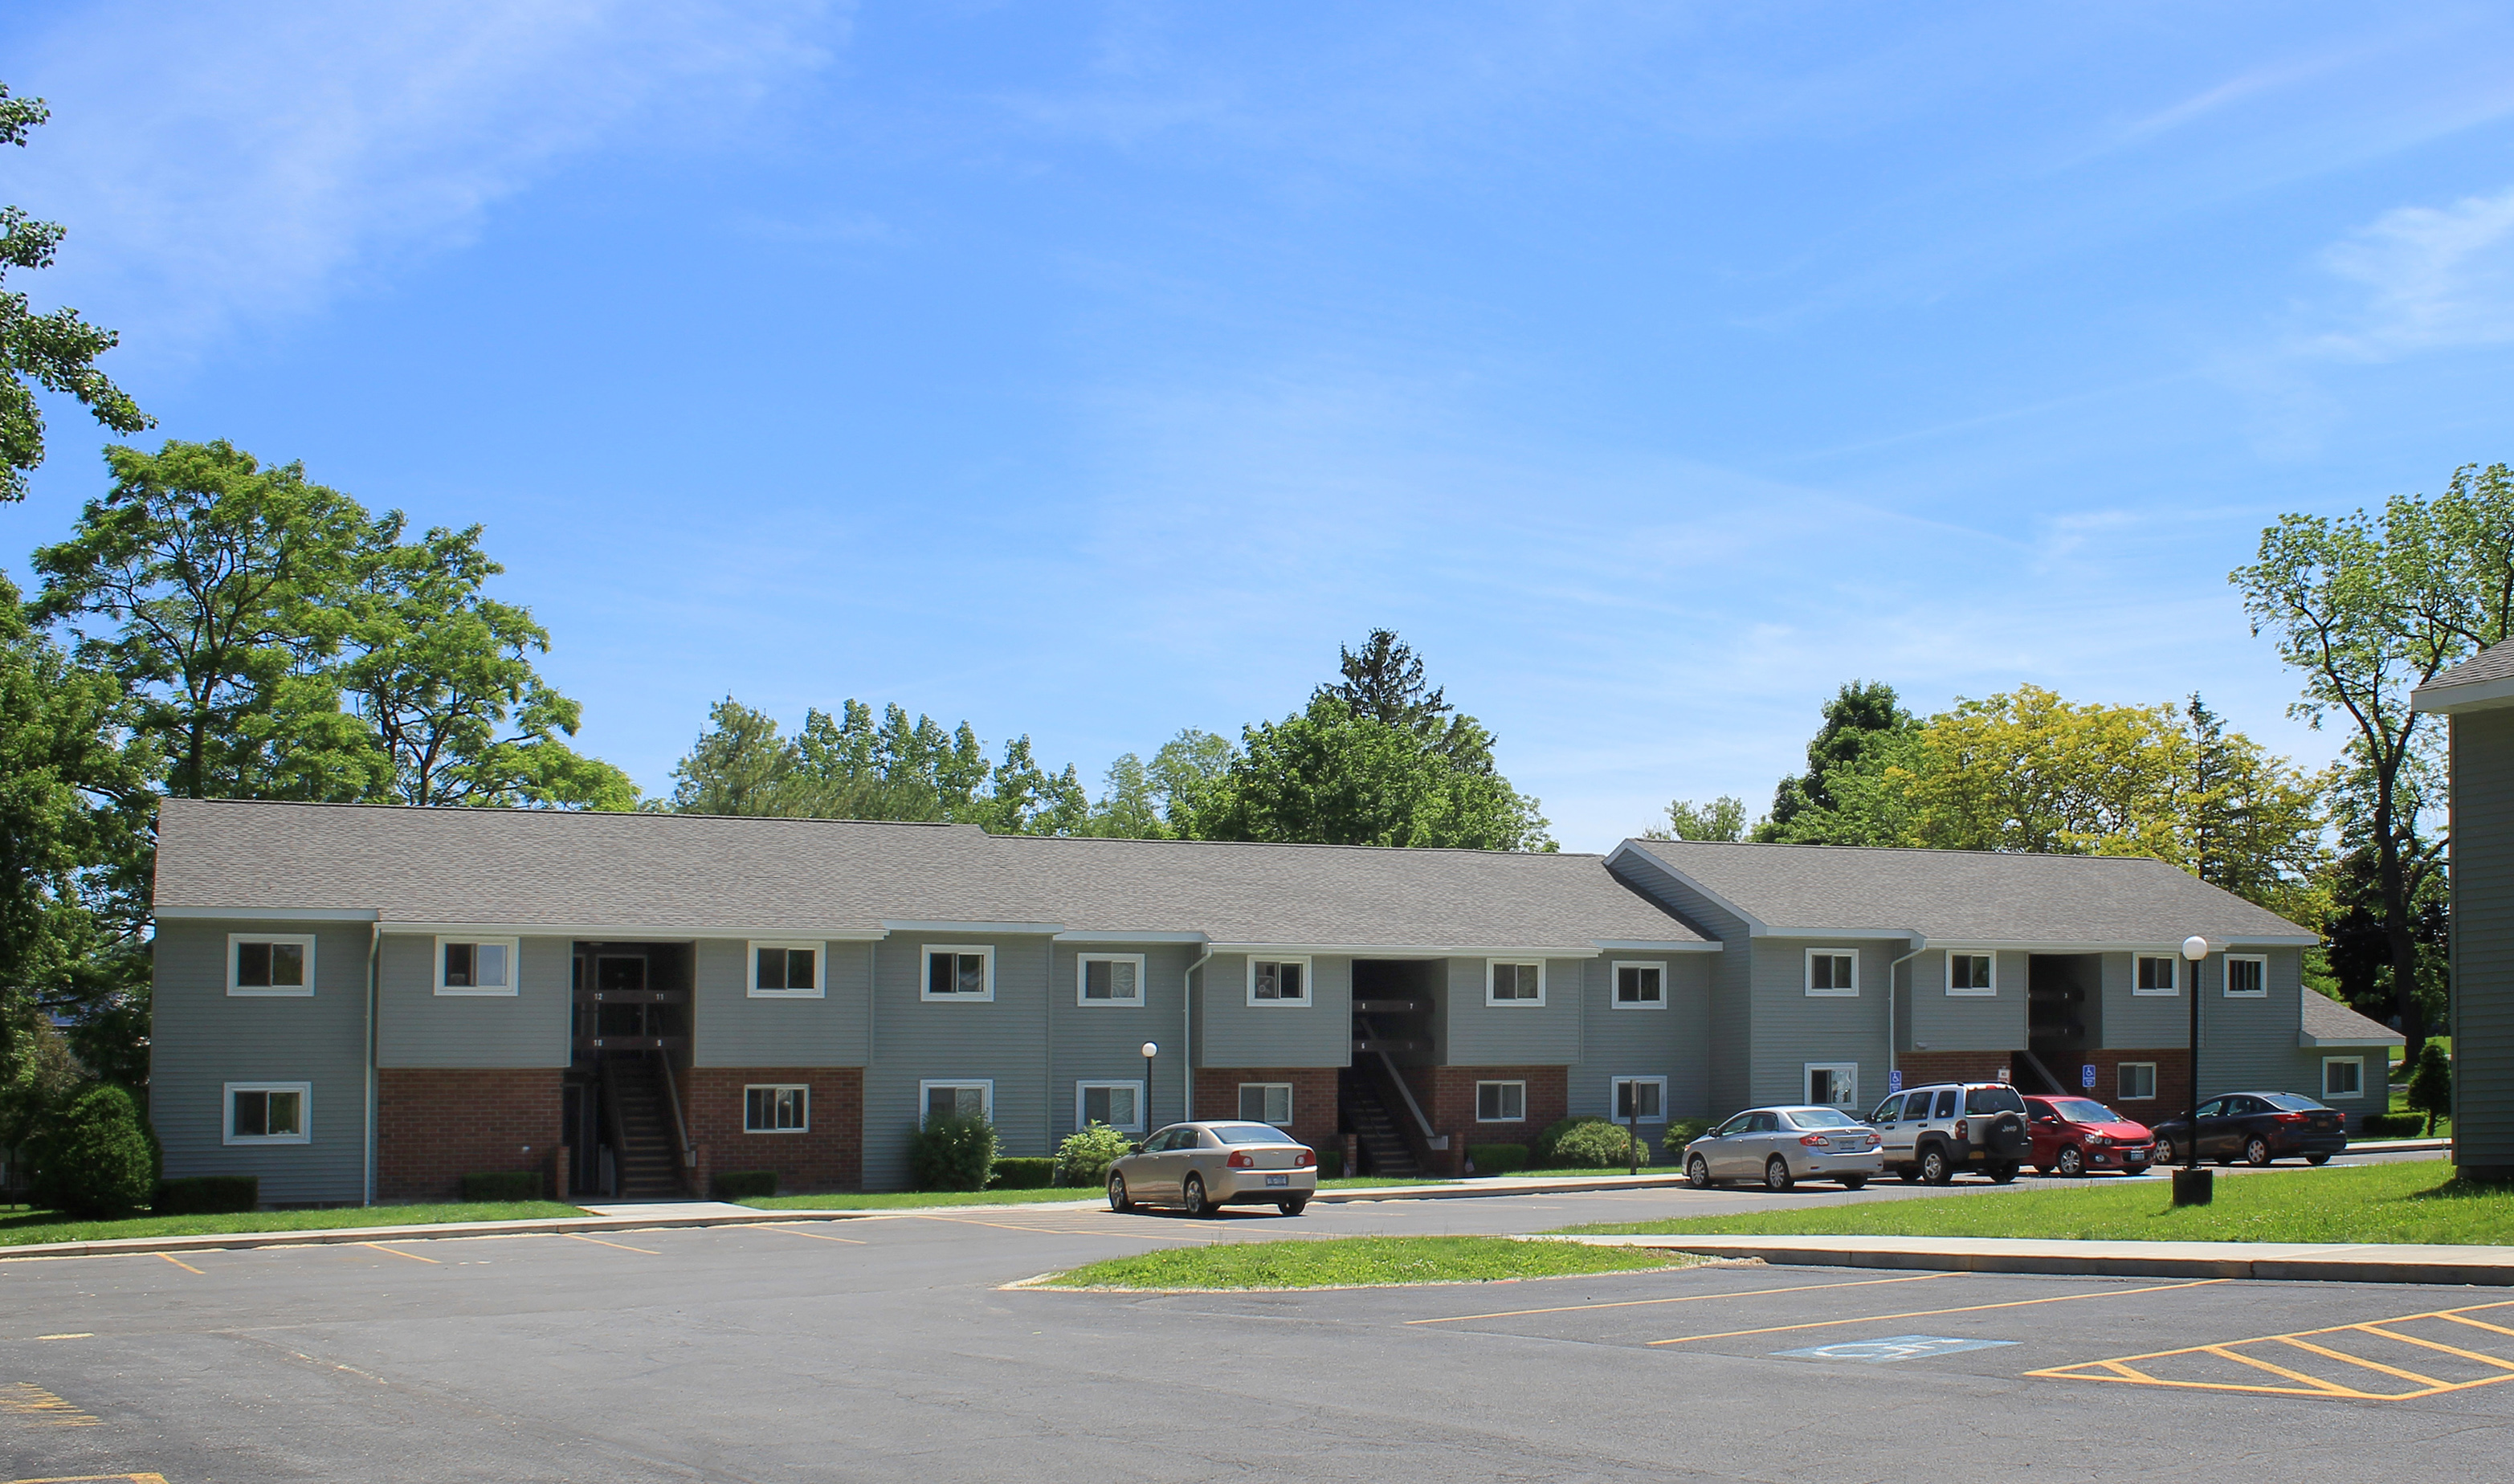 property management company client list syracuse ny house image of village manor apartments